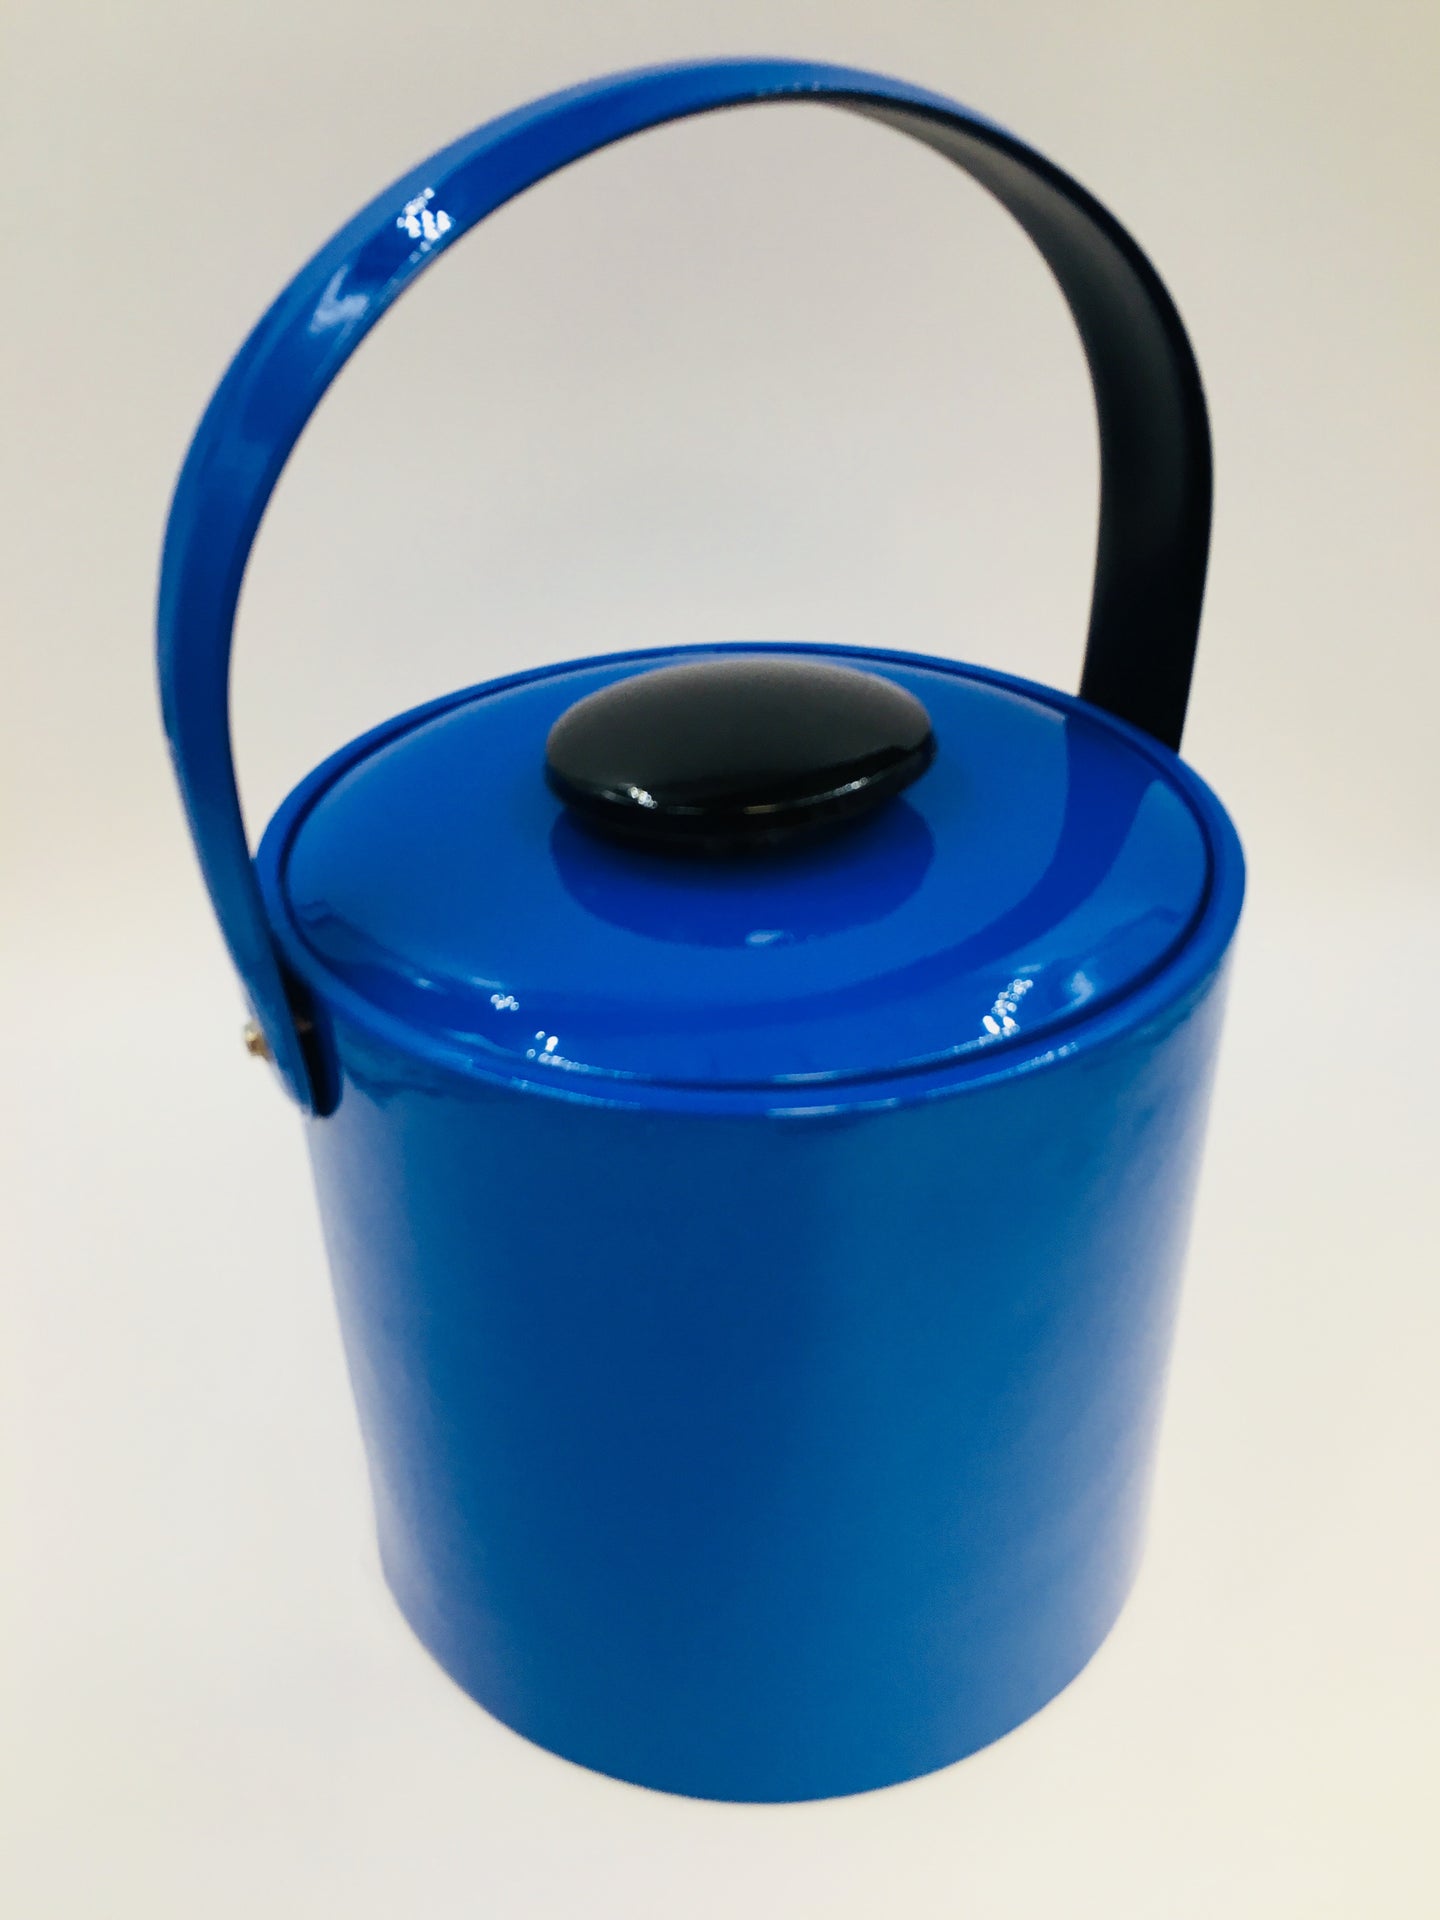 Vintage Georges Briard Electric Blue Patent Ice Bucket